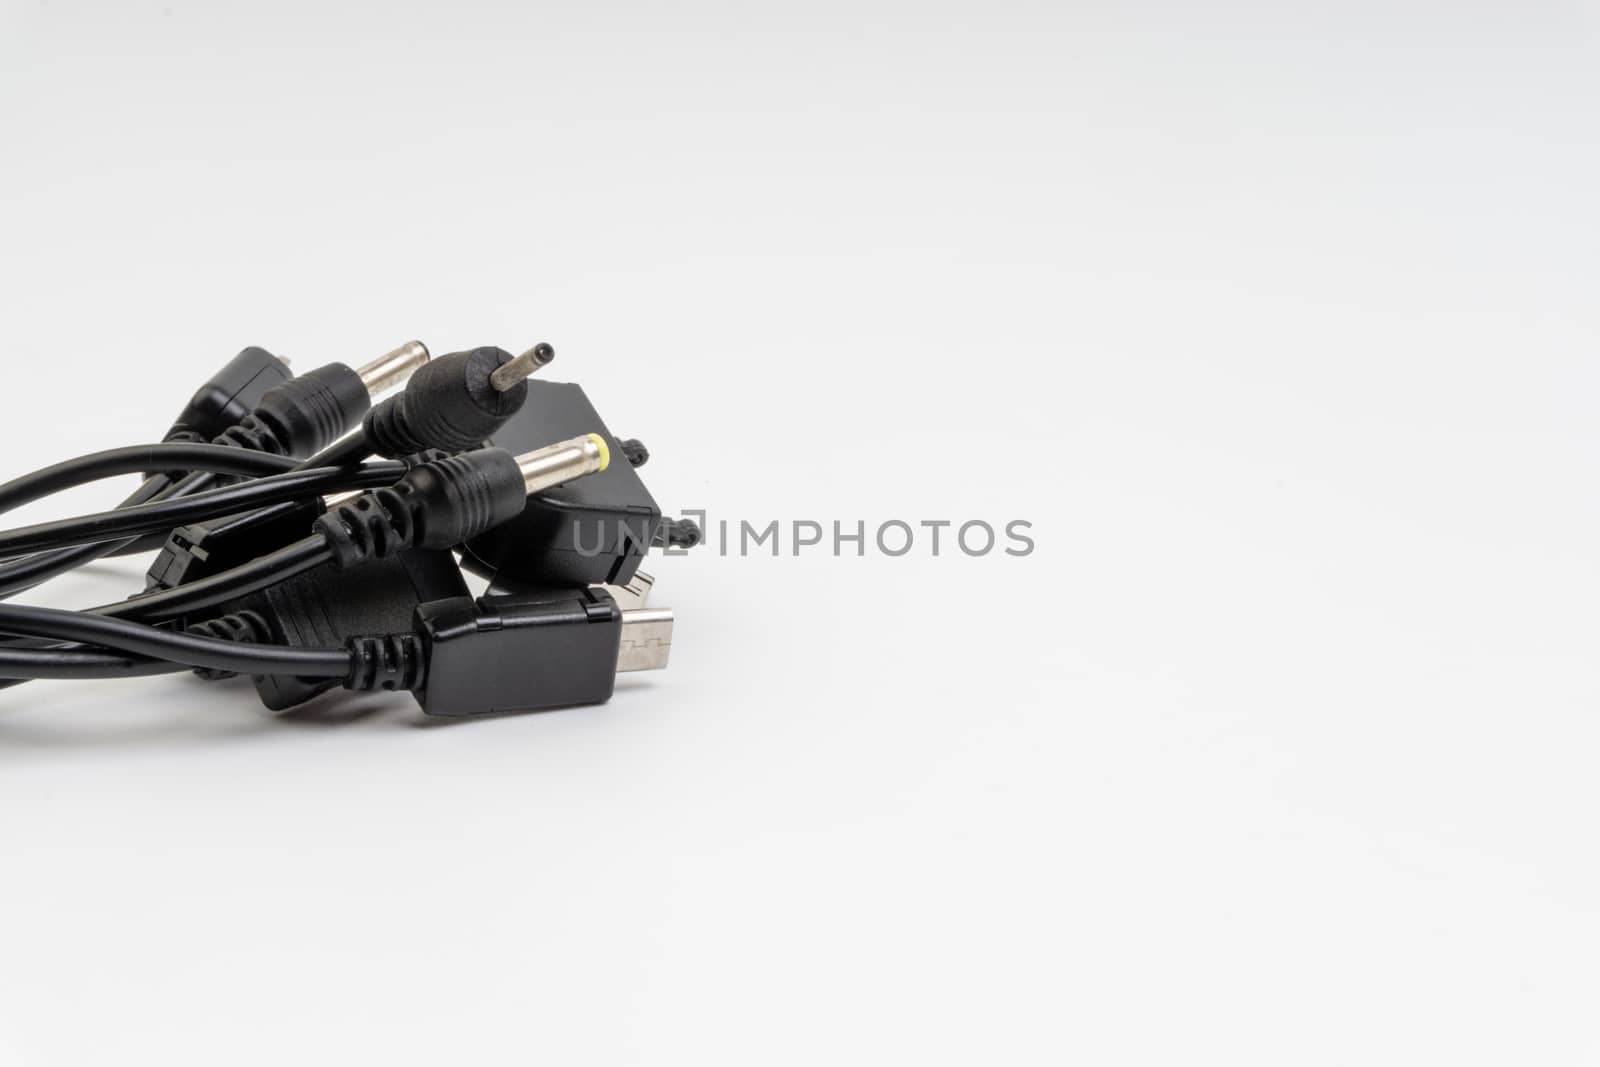 Universal recharger head or usb cable isolated on white background by silverwings